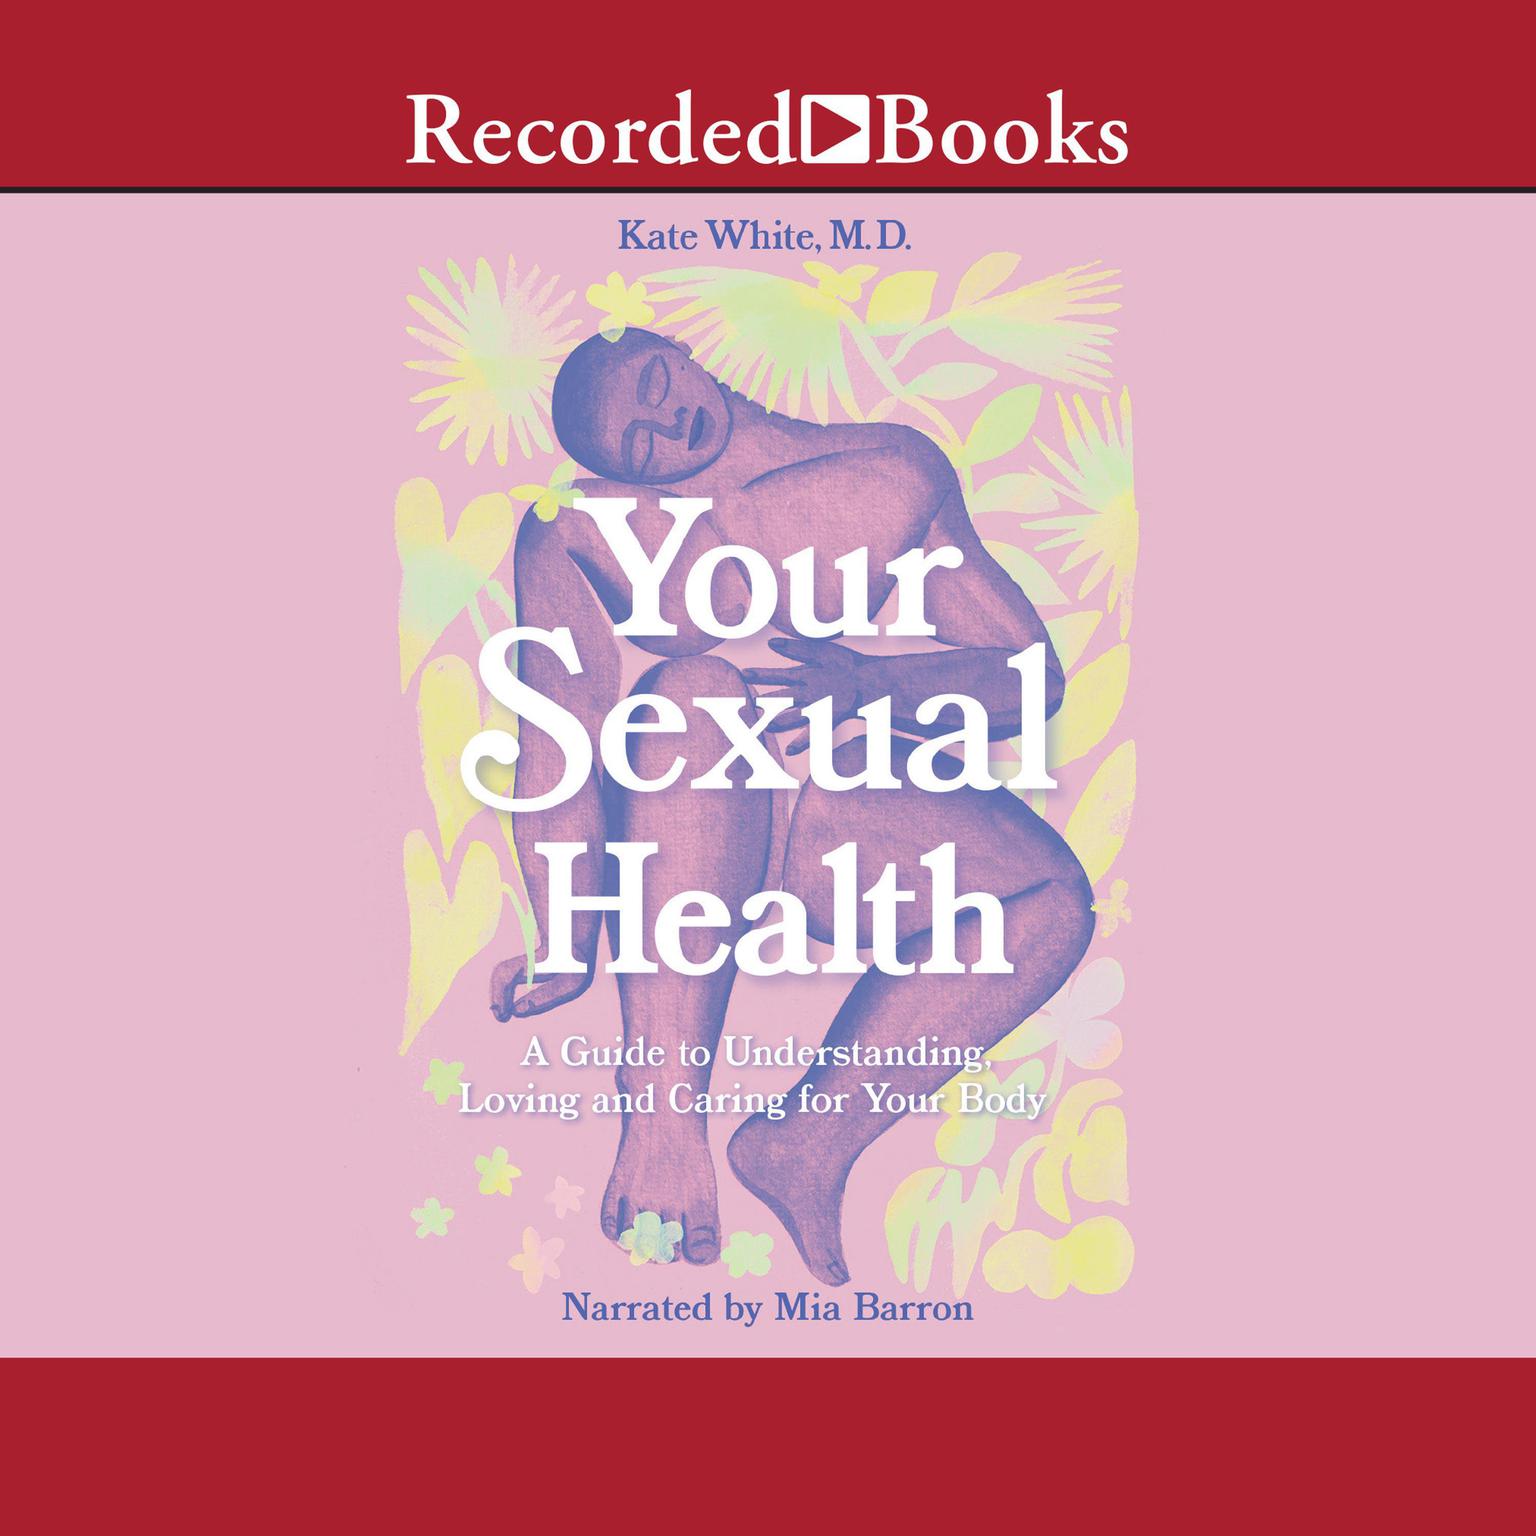 Your Sexual Health: A Guide to Understanding, Loving and Caring for Your Body Audiobook, by Kate White